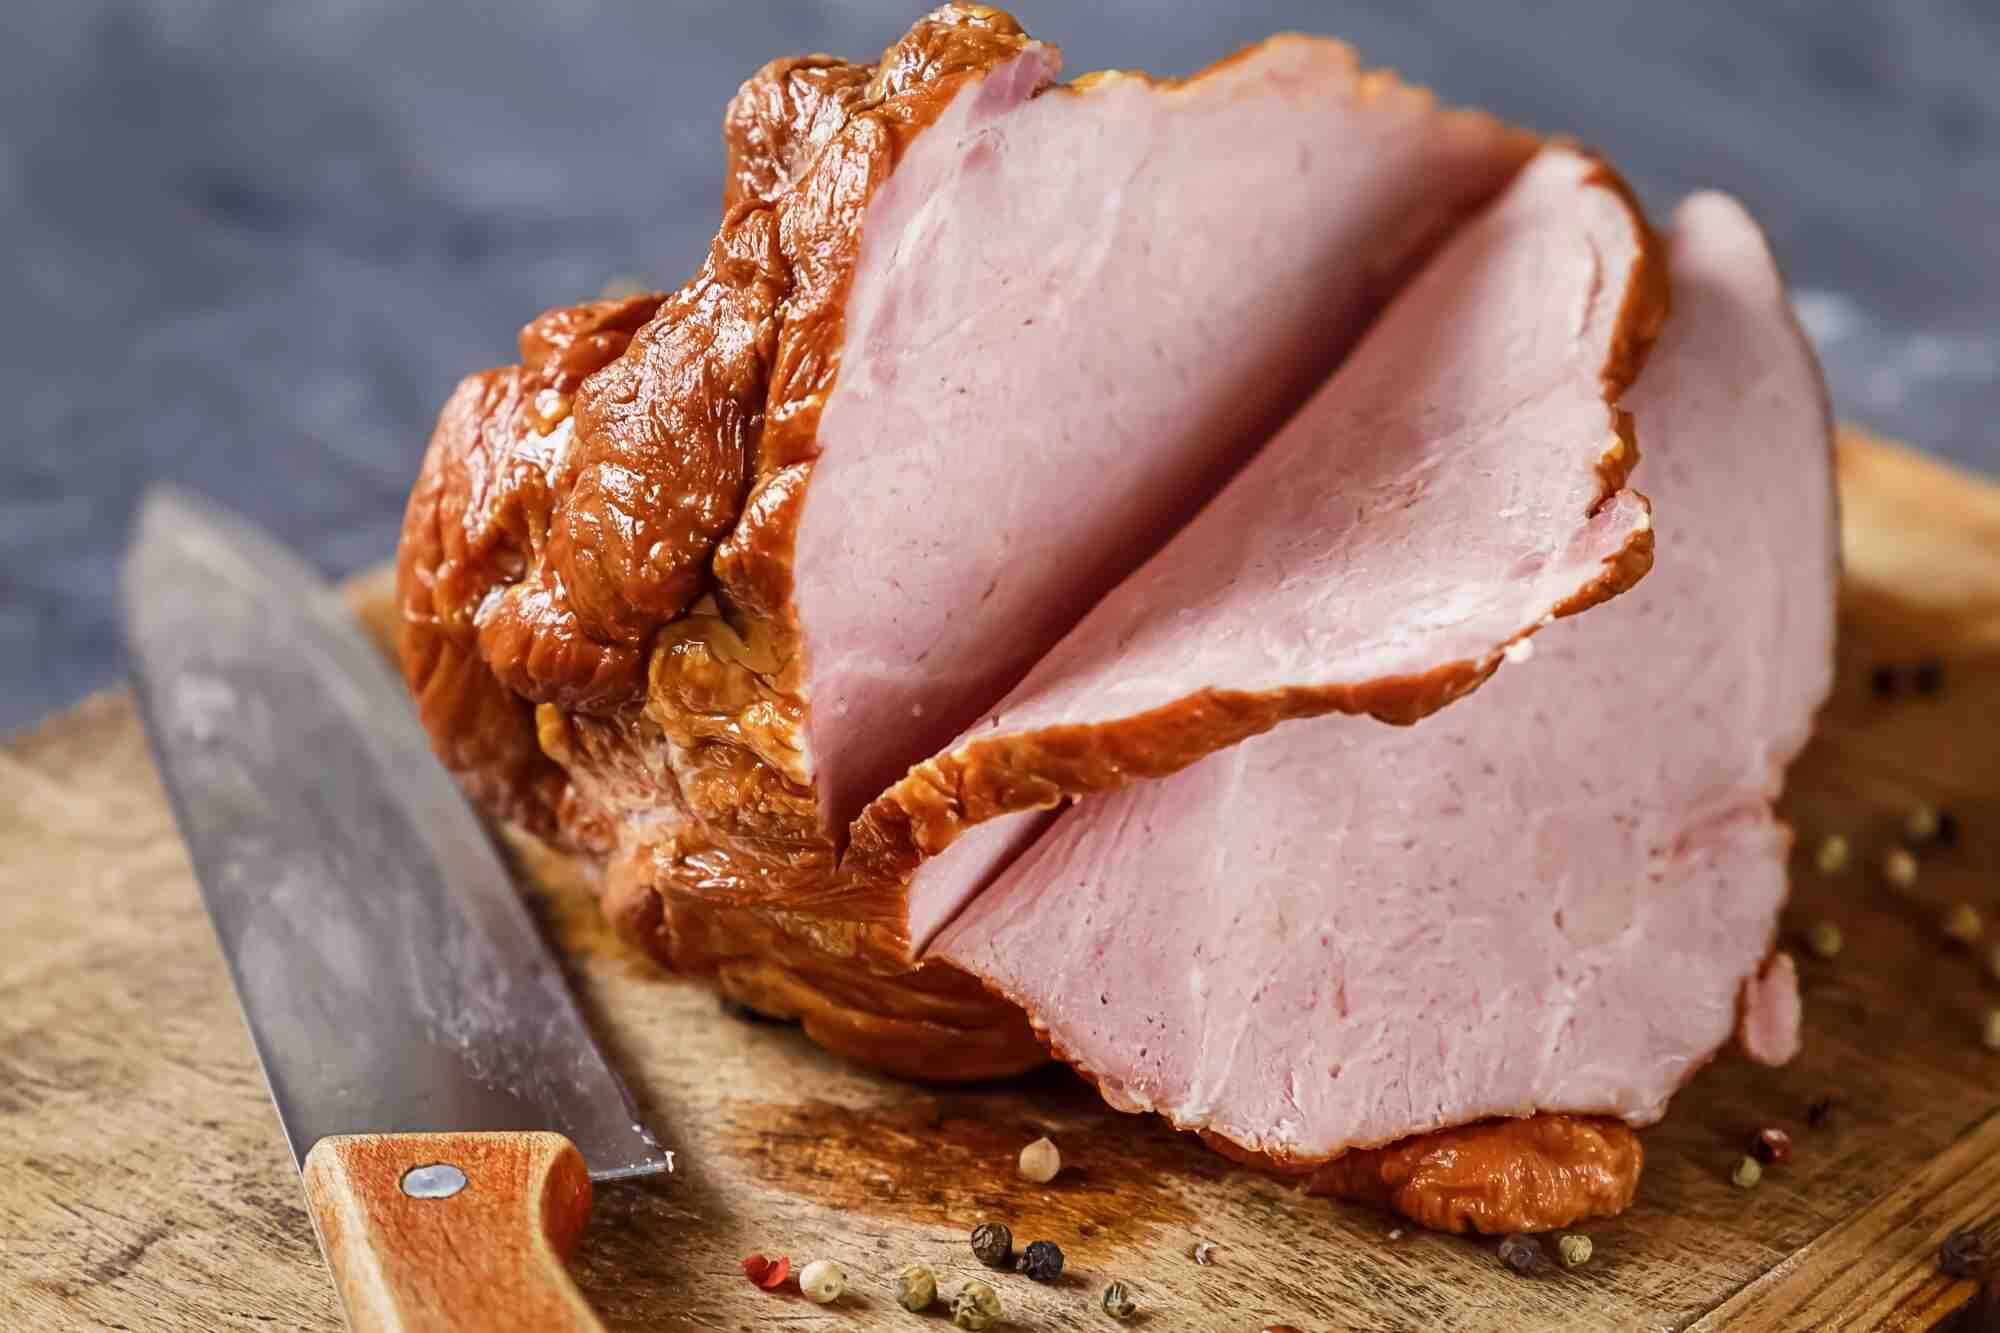 How hot should gammon be when cooked?